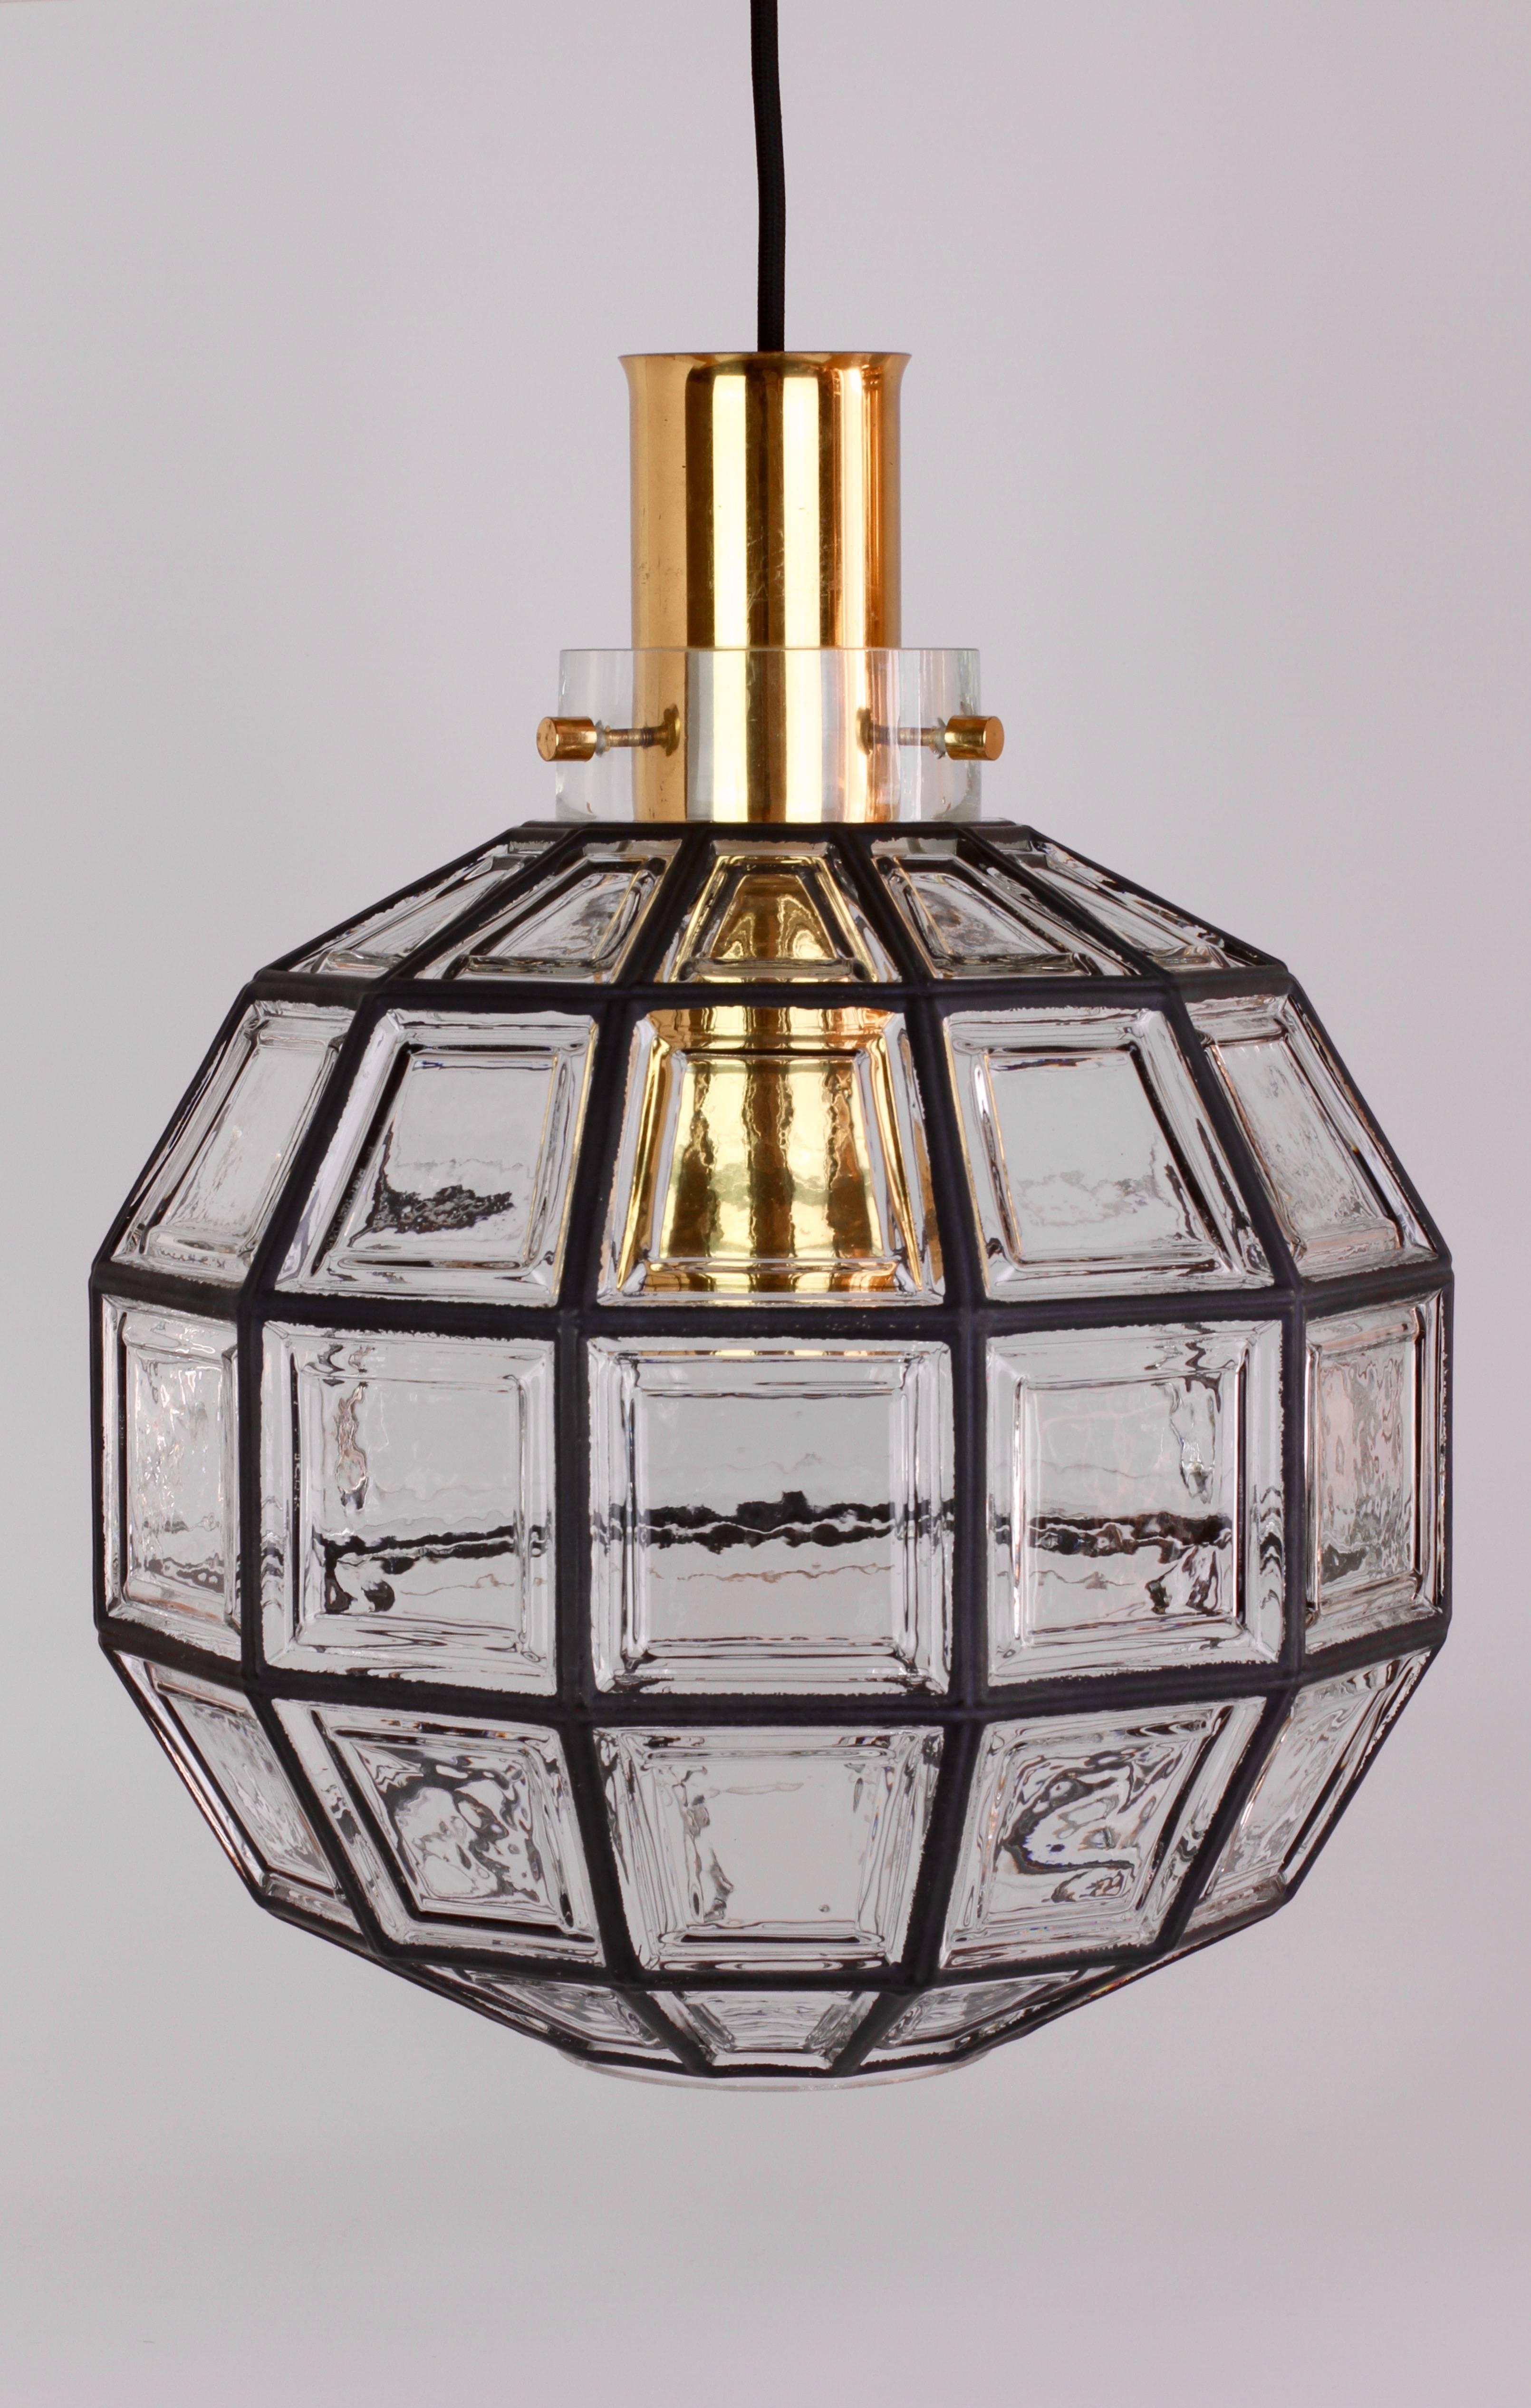 Beautifully designed and crafted, octagonally shaped and multi-faceted clear glass and brass Mid-Century pendant light. These large minimalistic, Contemporary Art Deco lantern style lights were manufactured by Glashütte Limburg, Germany, circa